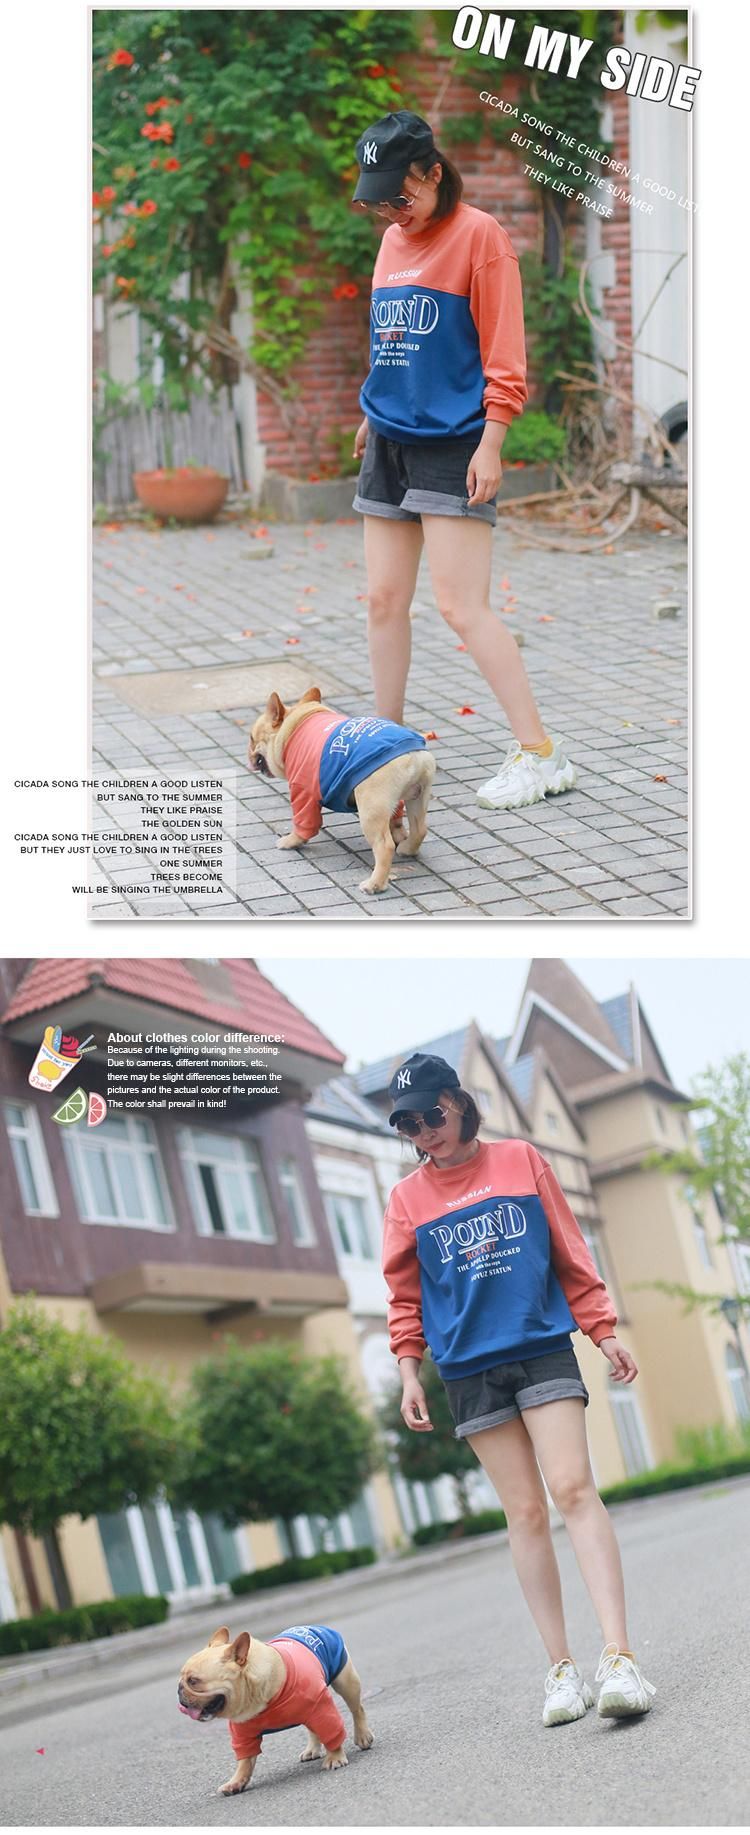 2022 Hot Sale Pet Sweater Two Legged Clothes Dog Owner Parent Child Clothes Contrast Stitching Casual Method Fighting Pug